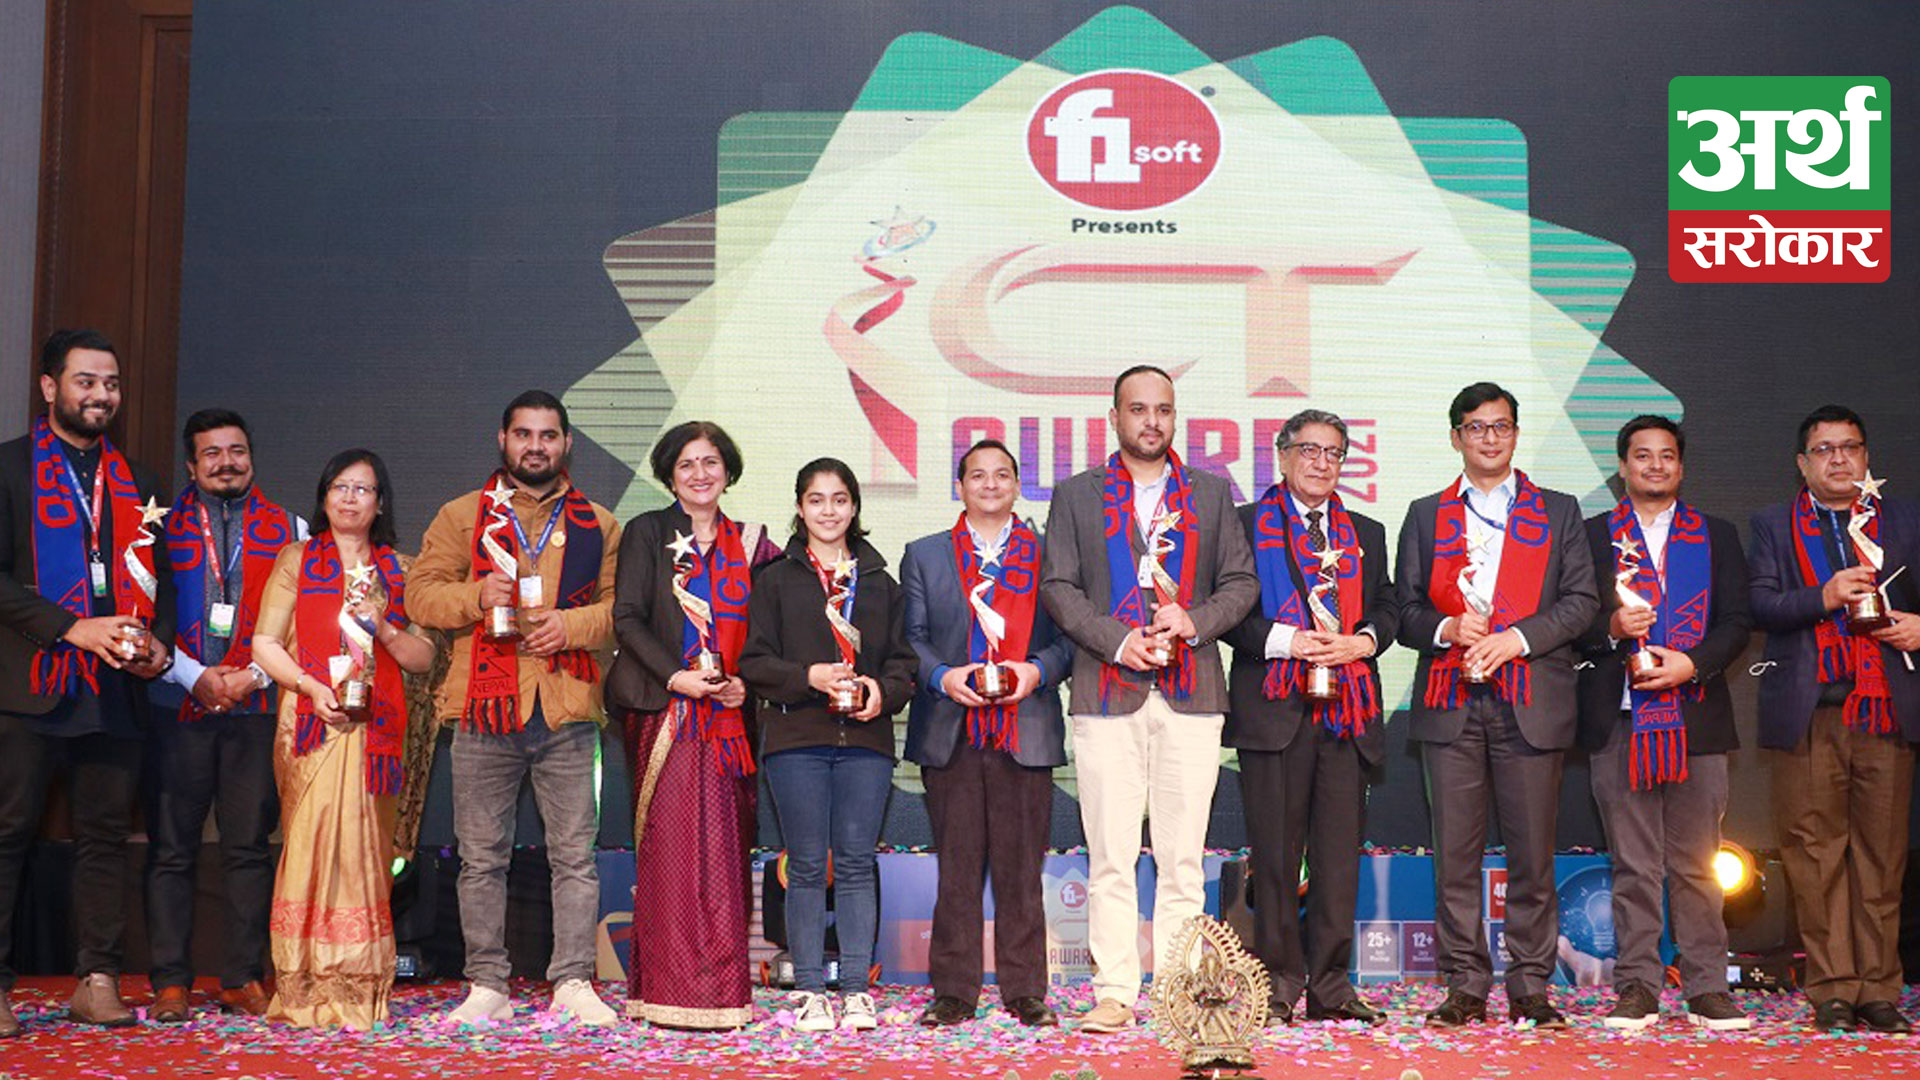 F1Soft ICT AWARD 2021 hosted successfully, winners of 12 distinct categories honored